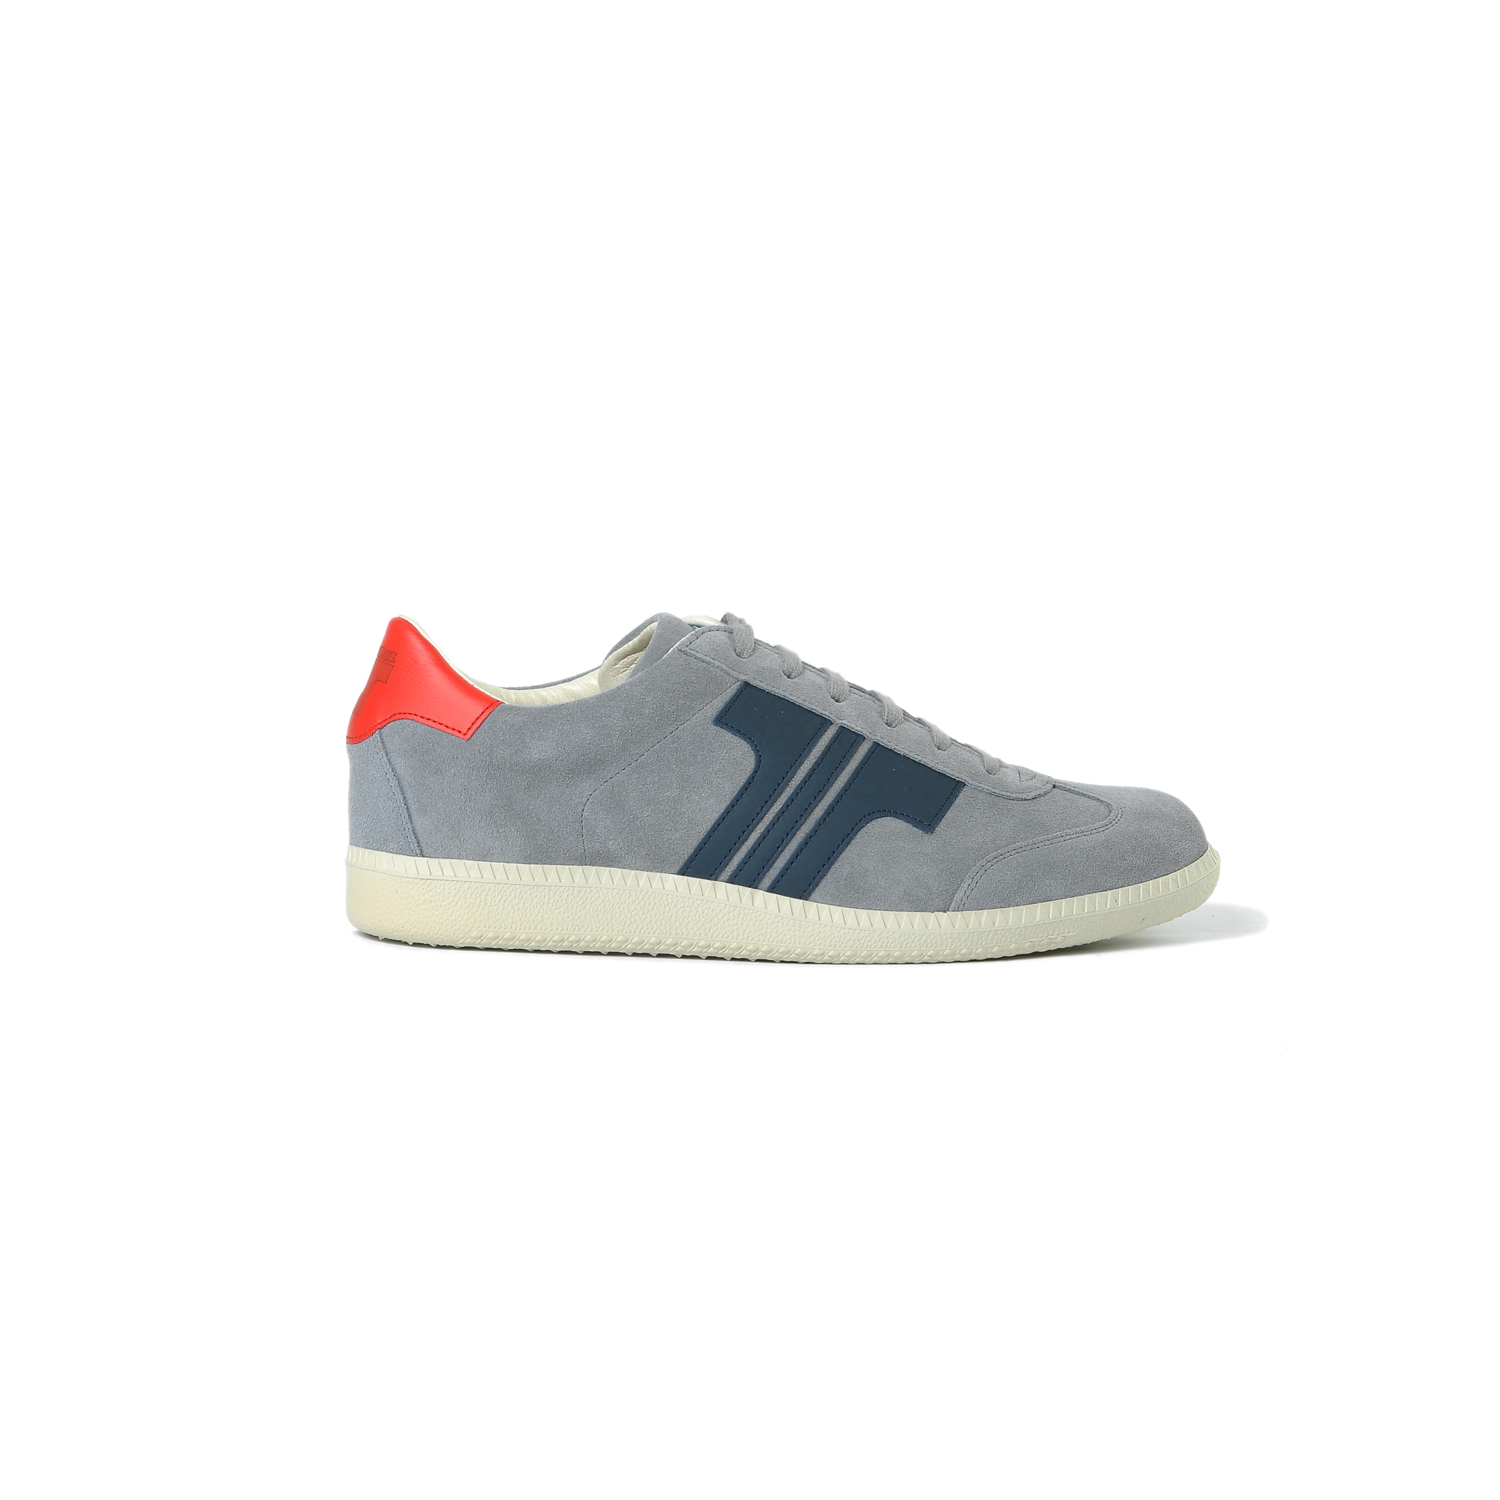 Tisza shoes - Comfort - Grey-navy-red